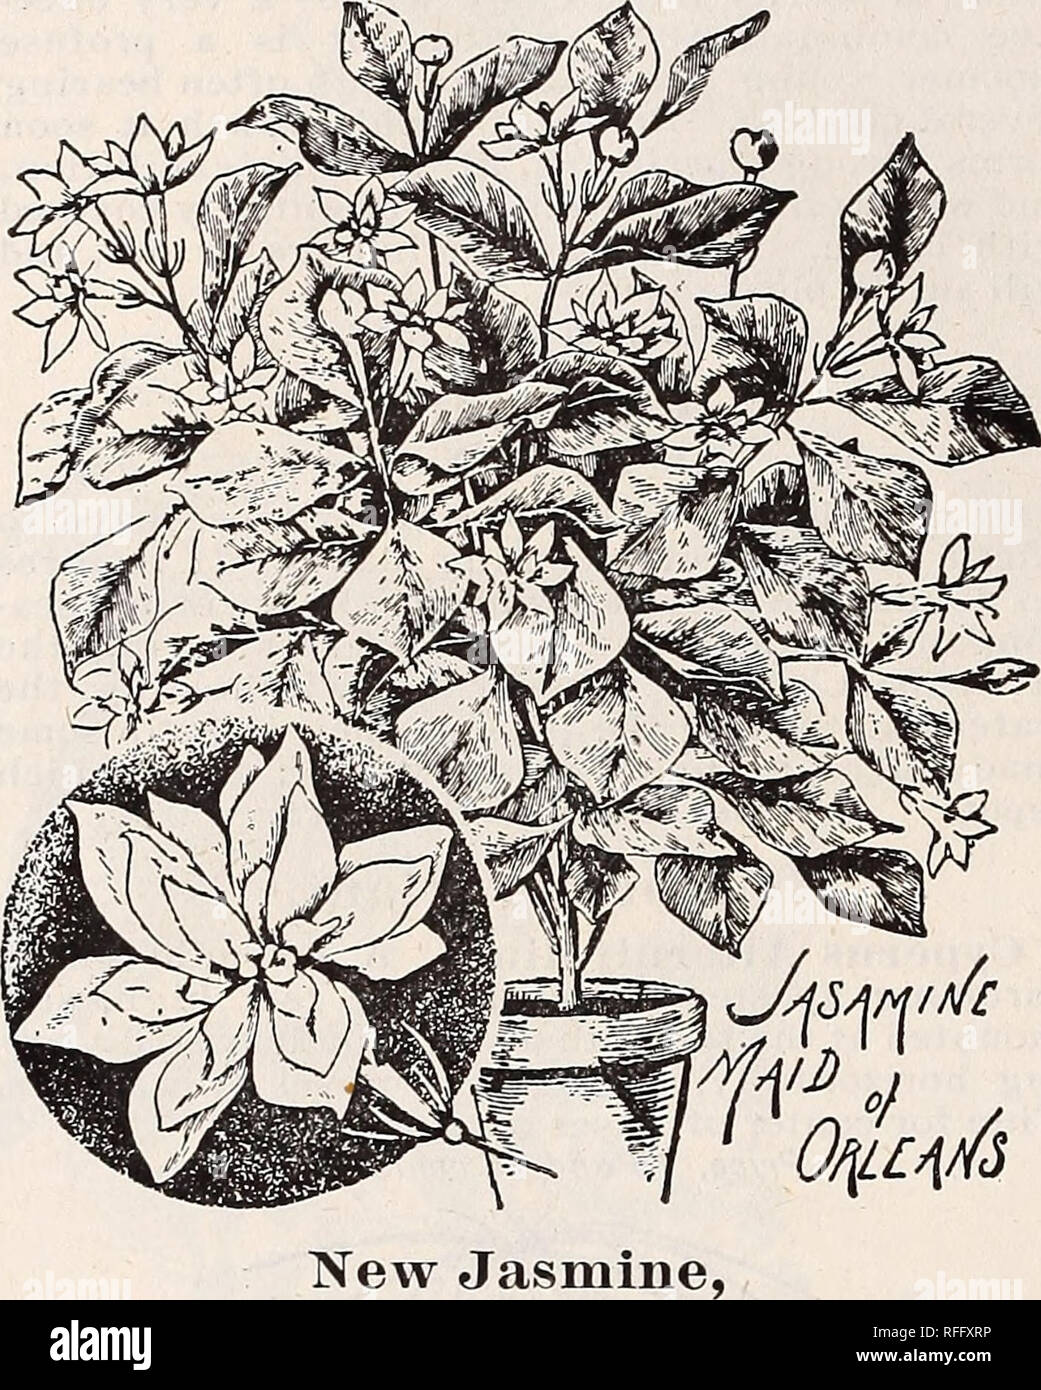 . Vestal's rose catalogue, 1900. Nursery stock Arkansas Catalogs; Roses Catalogs; Flowers Catalogs; Vegetables Catalogs; Fruit Catalogs; Seed industry and trade Catalogs; Plants, Ornamental Catalogs. 38 Joseph W. Vestai, &amp; Son's Ii,i,ustratkd and Descriptive Catai^ogue. Cape Jessamine. (Gardenia Florida.) This splendid plant is a great favorite with all who know its true worth. The blooms are pure white and measure inches across and are de- lig-htfully fragrant. The flowers are extremely- fashionable, and for this reason, together with its ease of culture, we feel sure.of a lively demand f Stock Photo